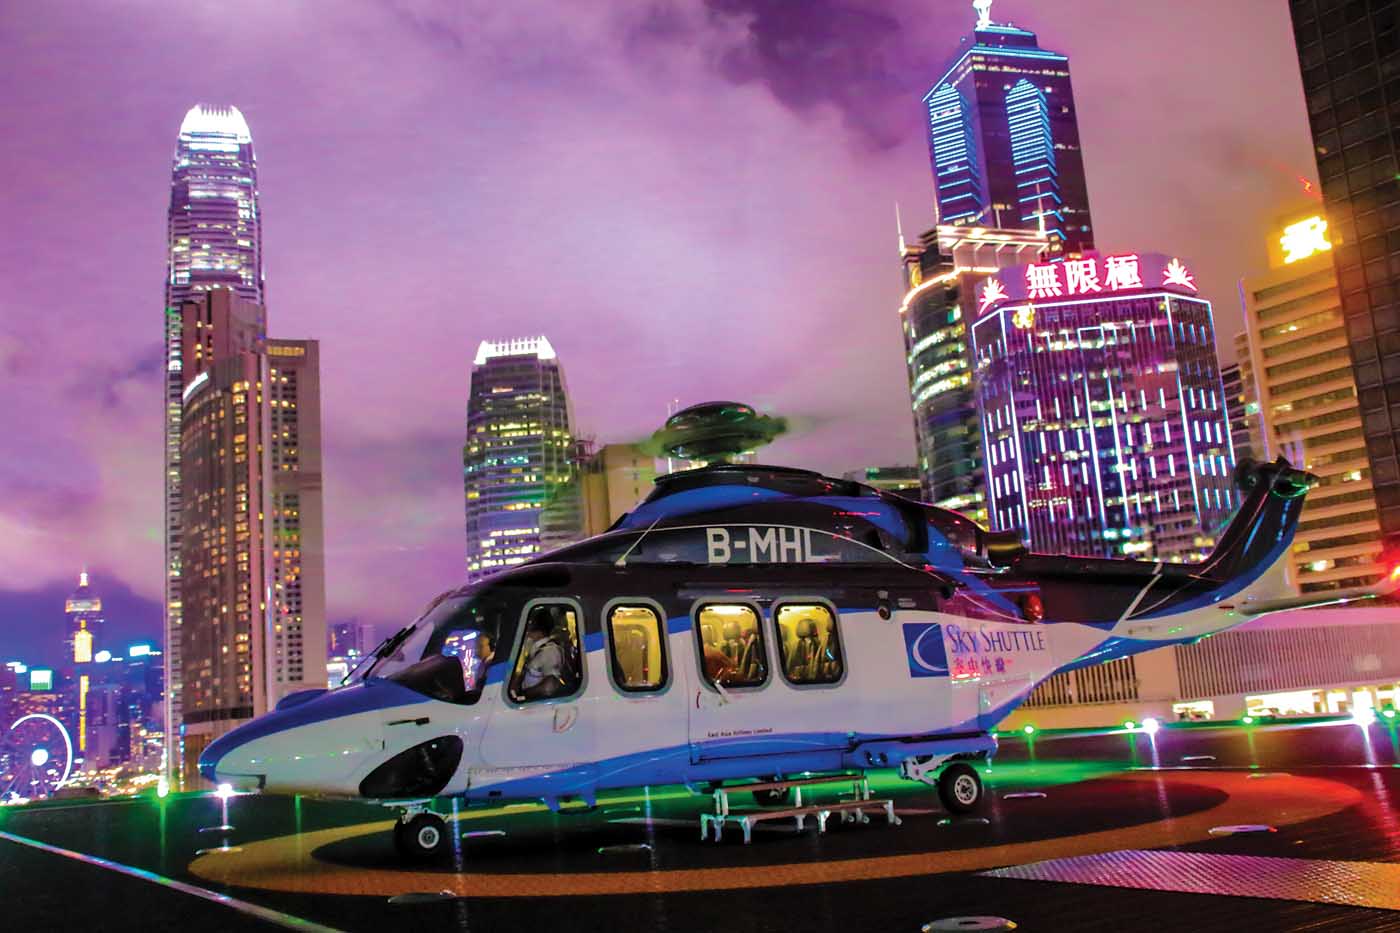 Every day, Sky Shuttle Helicopters flies 20 scheduled round-trip flights between Hong Kong and Macau, and three flights between Macau and Shenzhen, with a fleet of Leonardo AW139s. The Leonardo AW139 was introduced in April 2009 to make the inaugural flight from the new Sky Shuttle Heliport in Hong Kong. Chi Yin Liao Photo